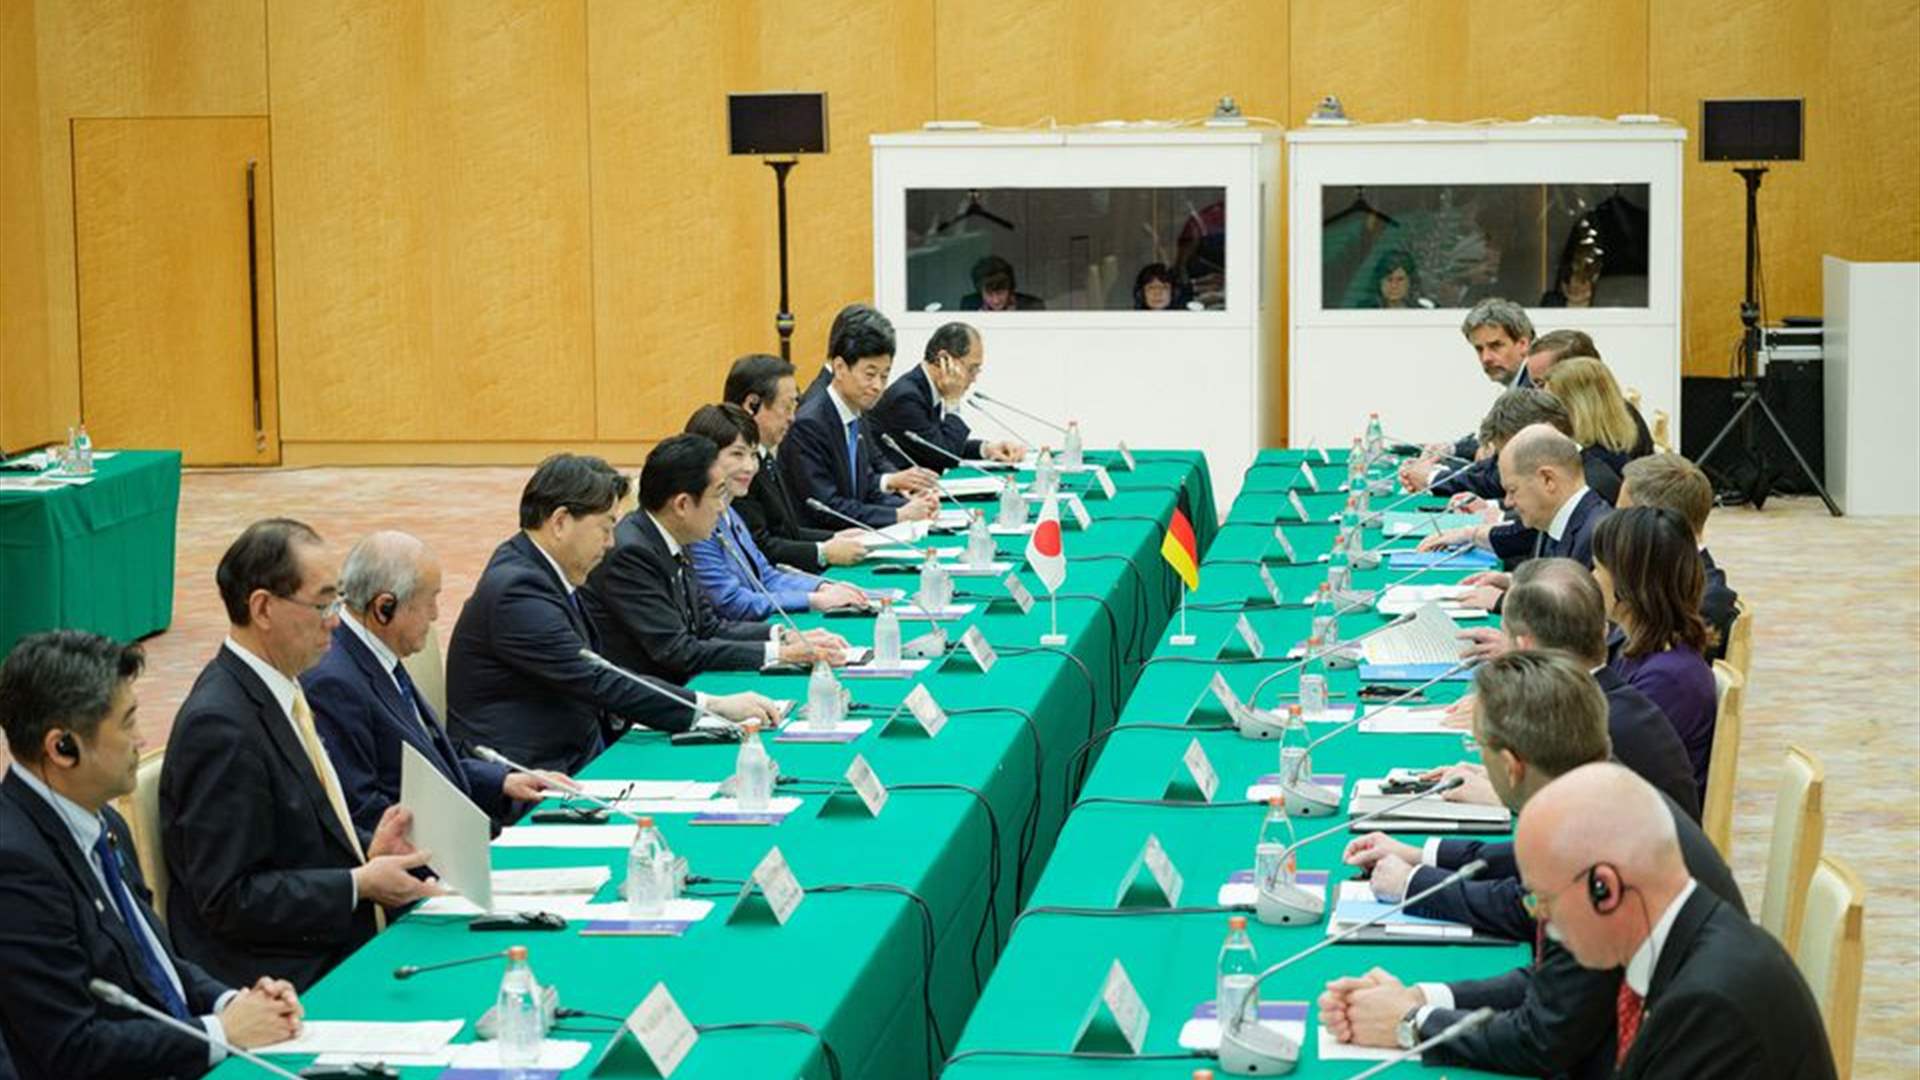 Japan, Germany agree to carefully monitor markets, coordinate as needed